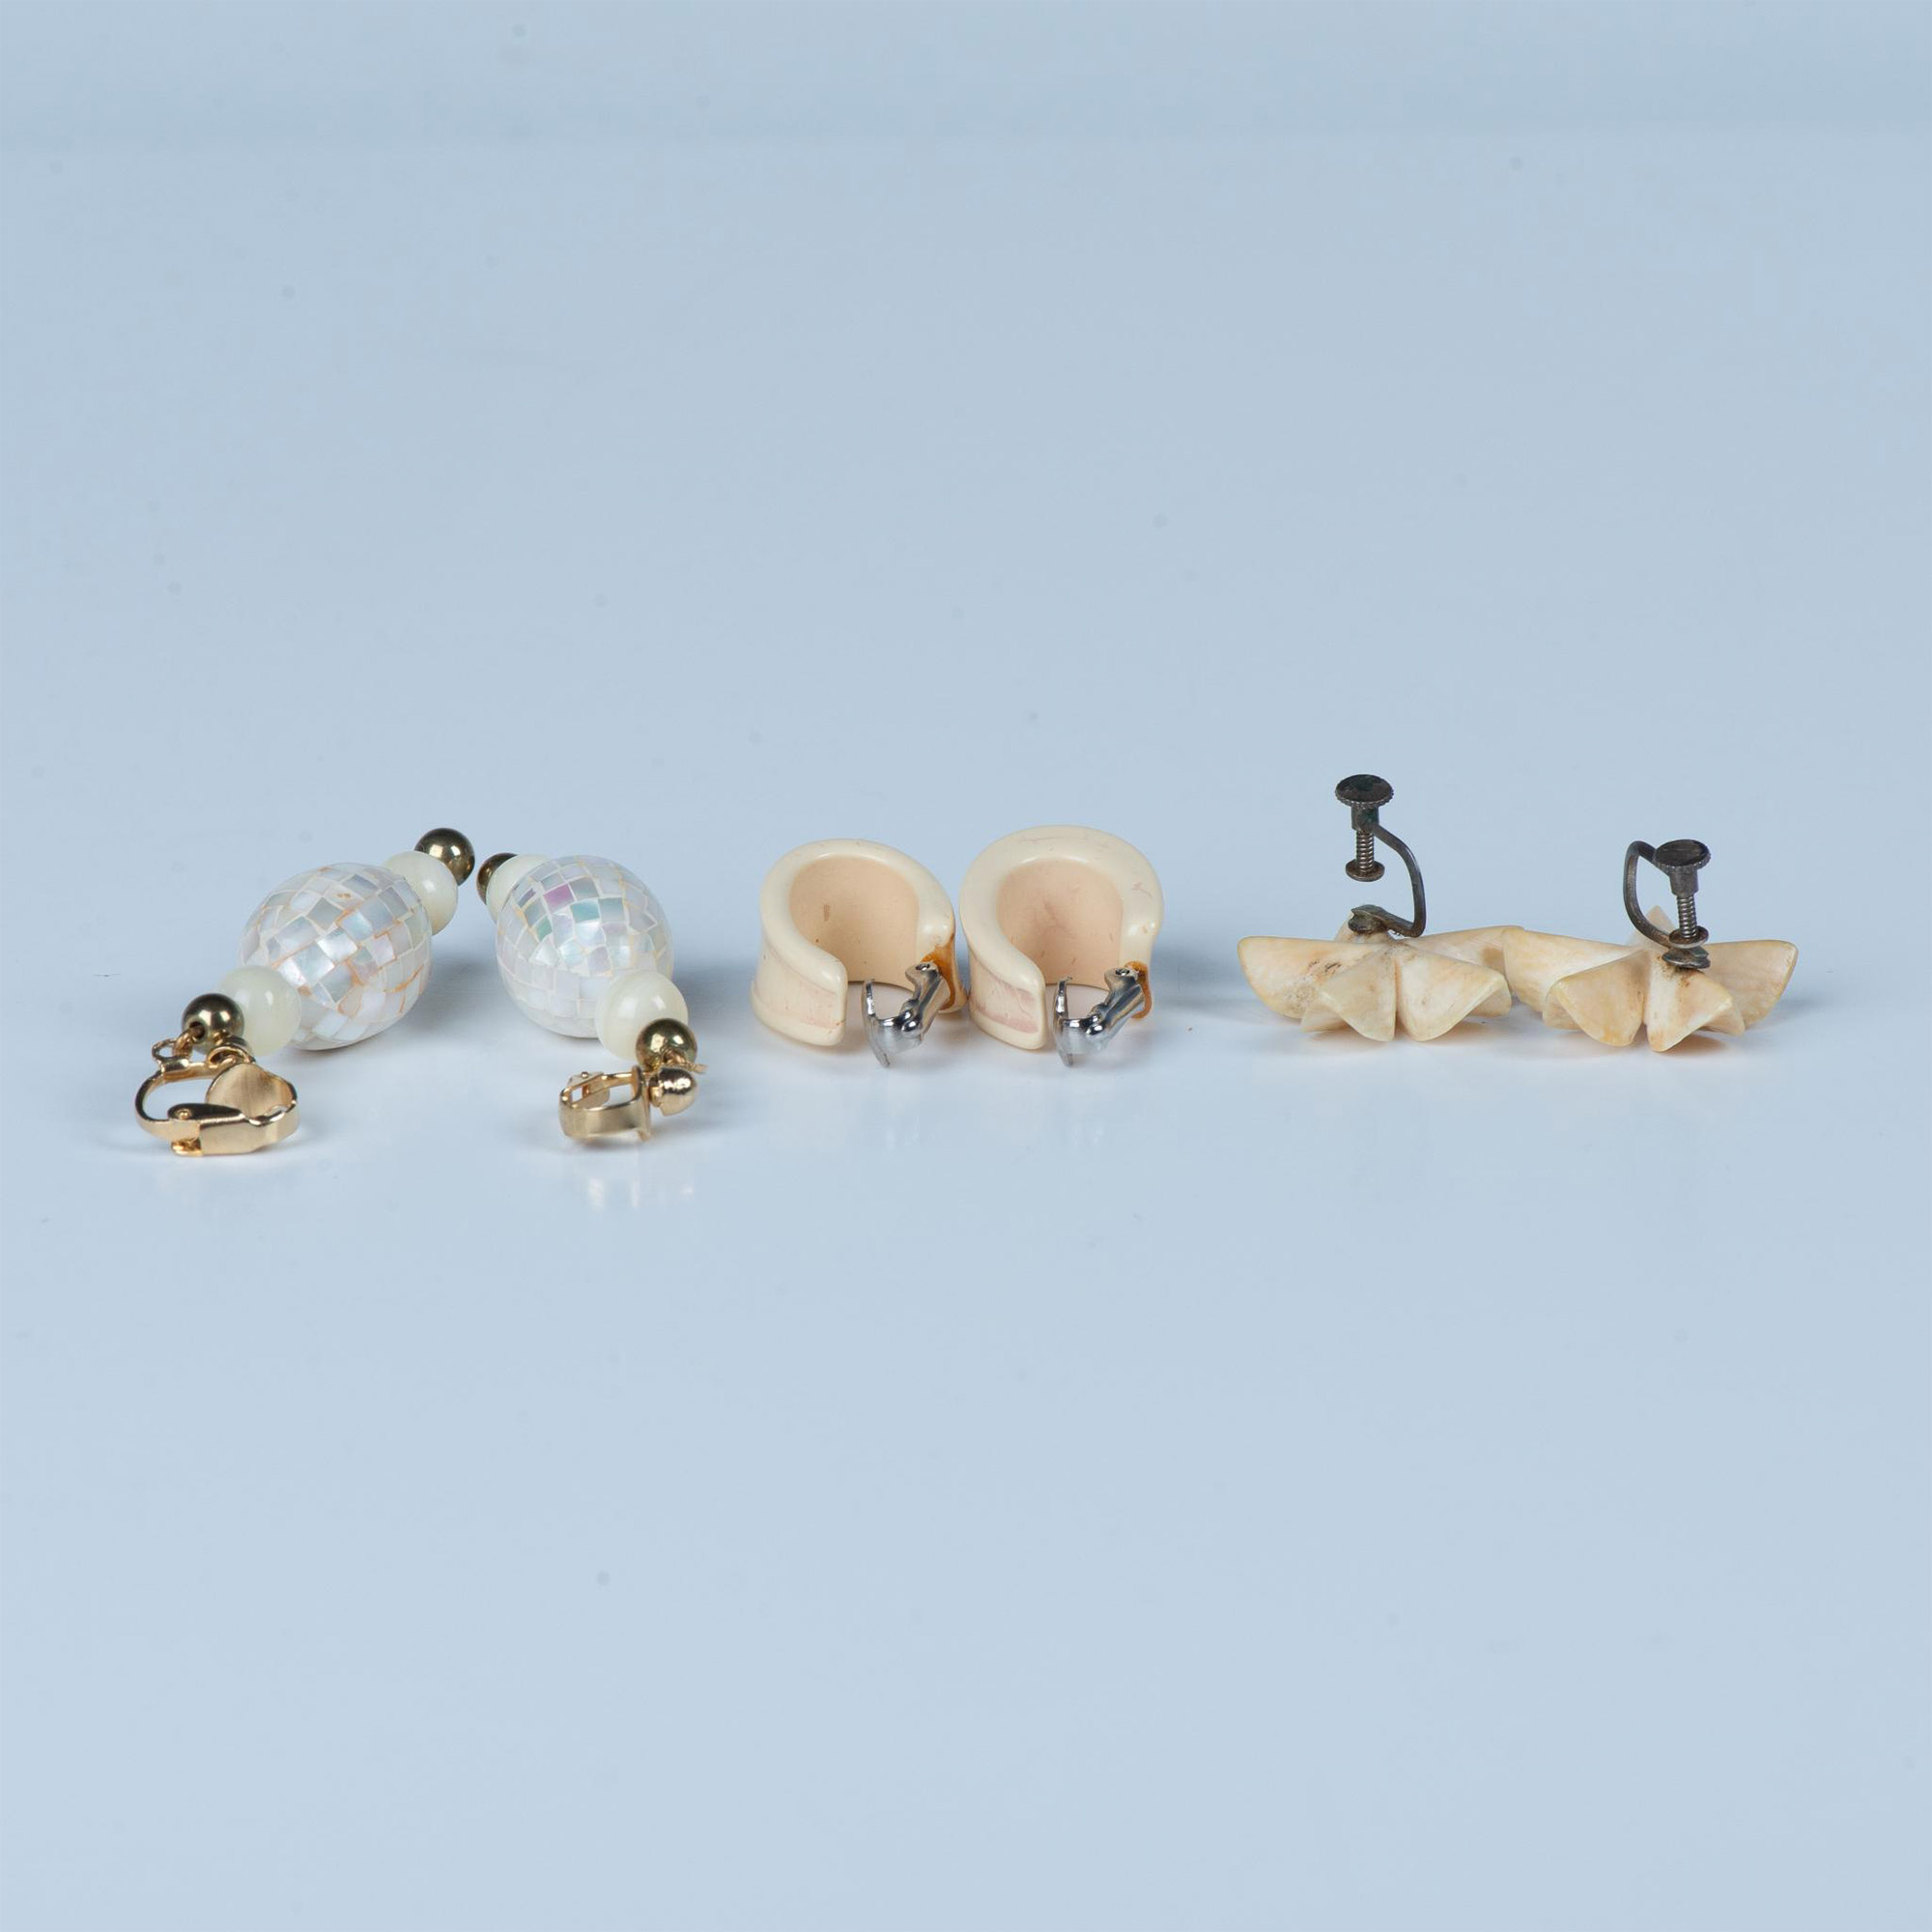 3 Pairs of Creamy Color Earrings - Image 2 of 5